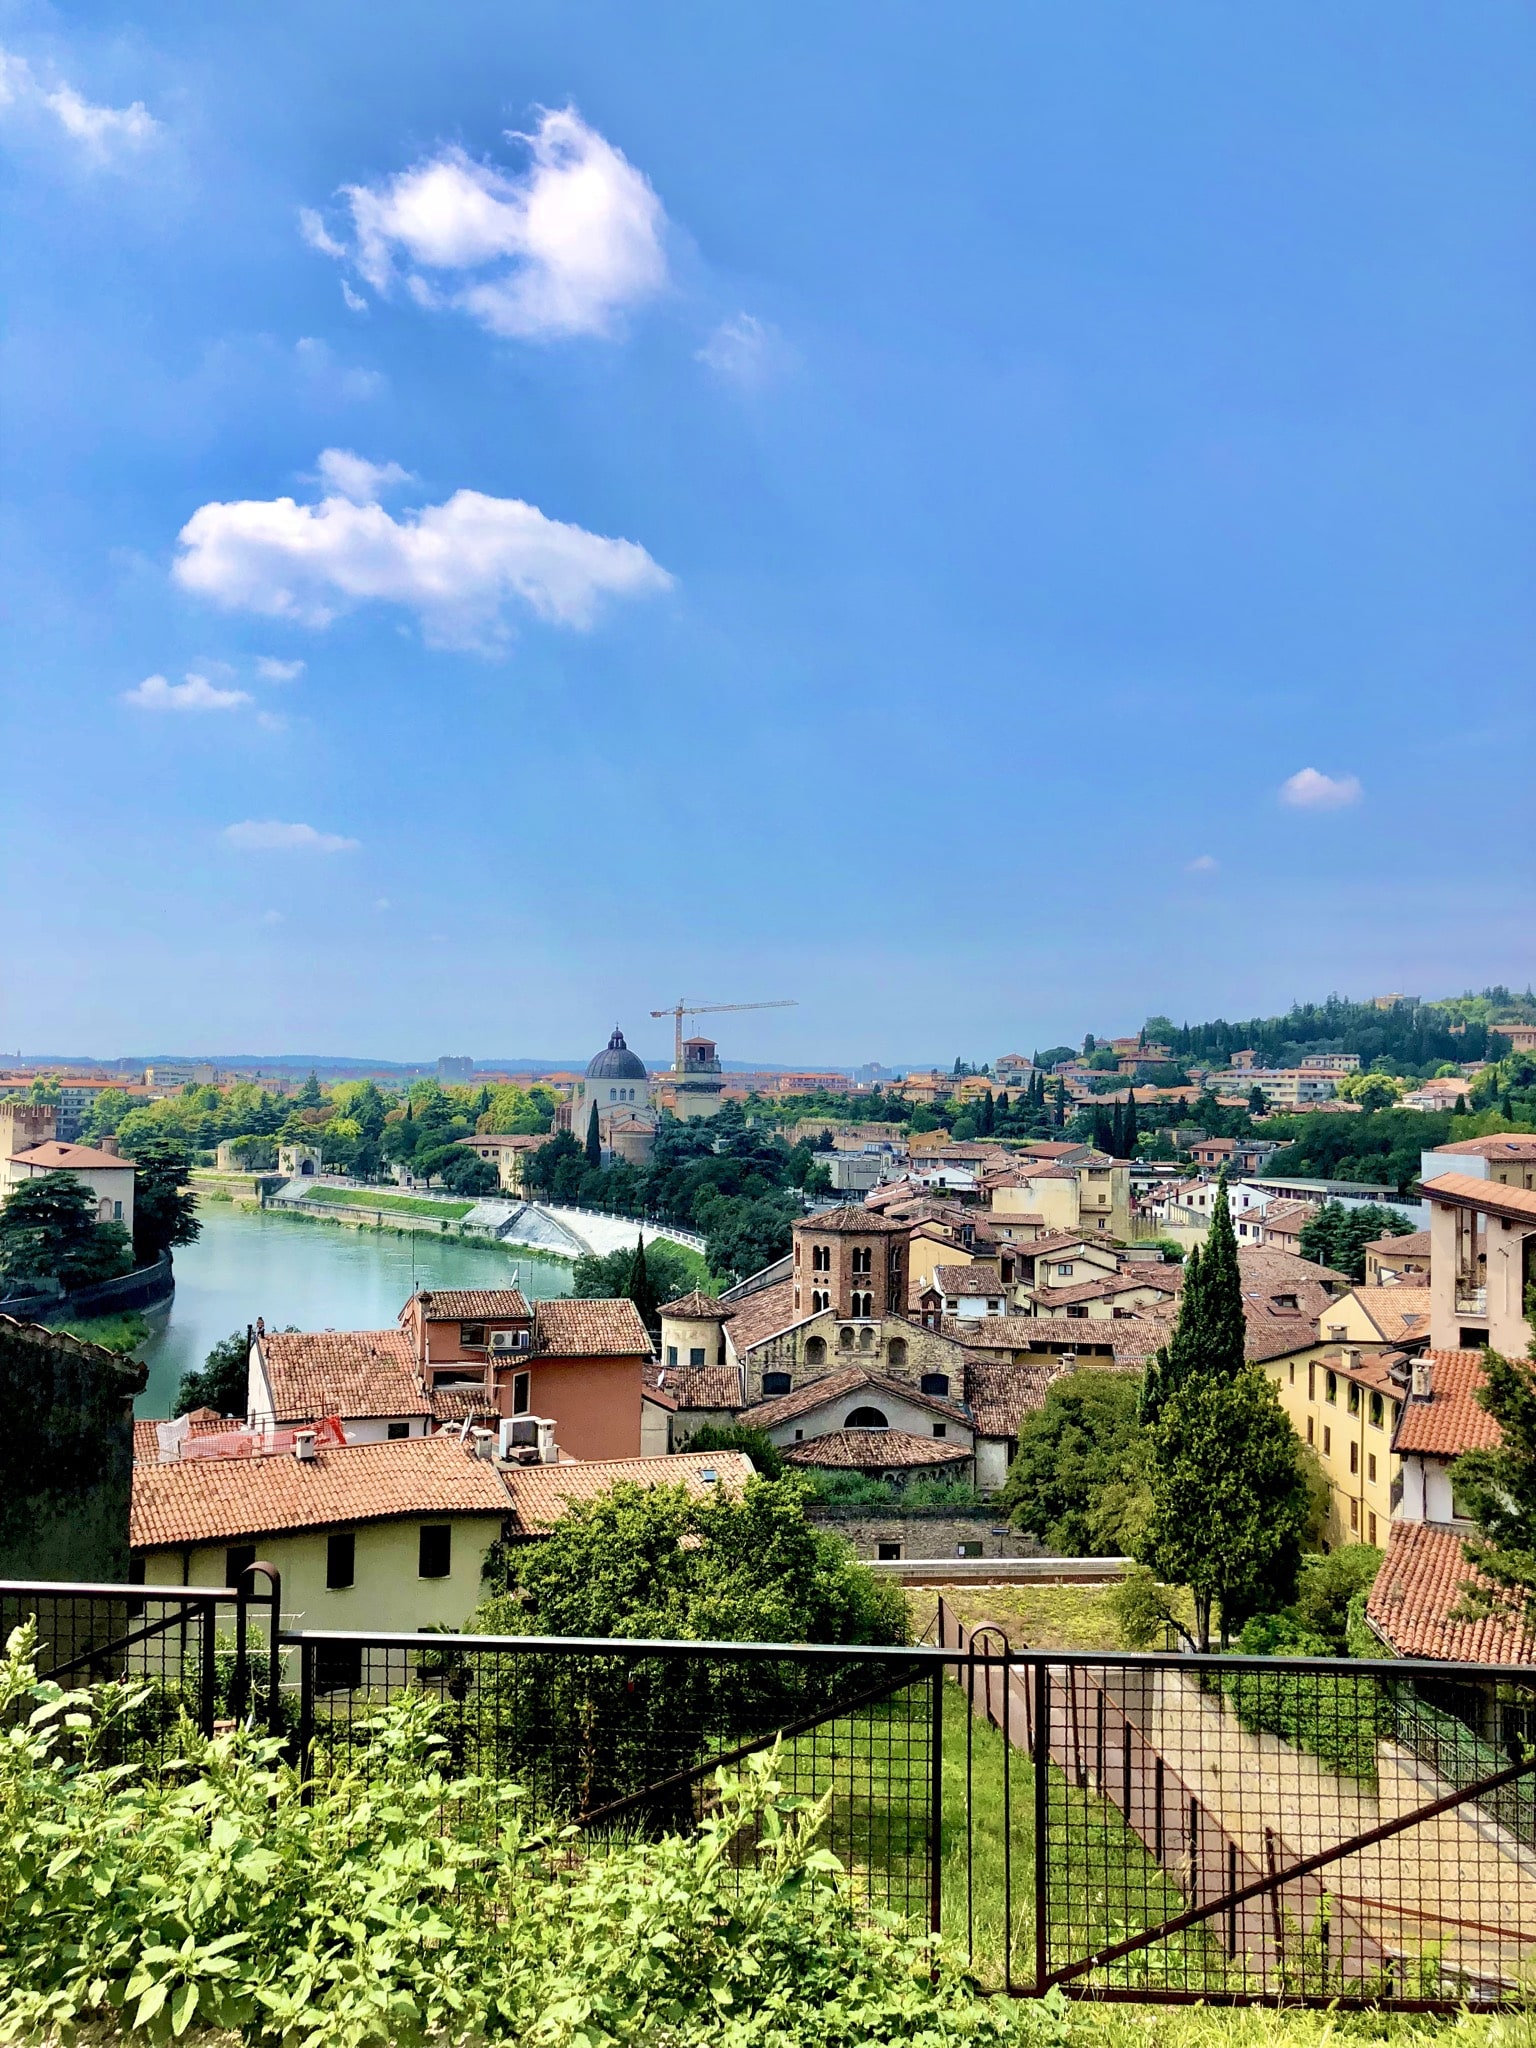 Two days in Verona